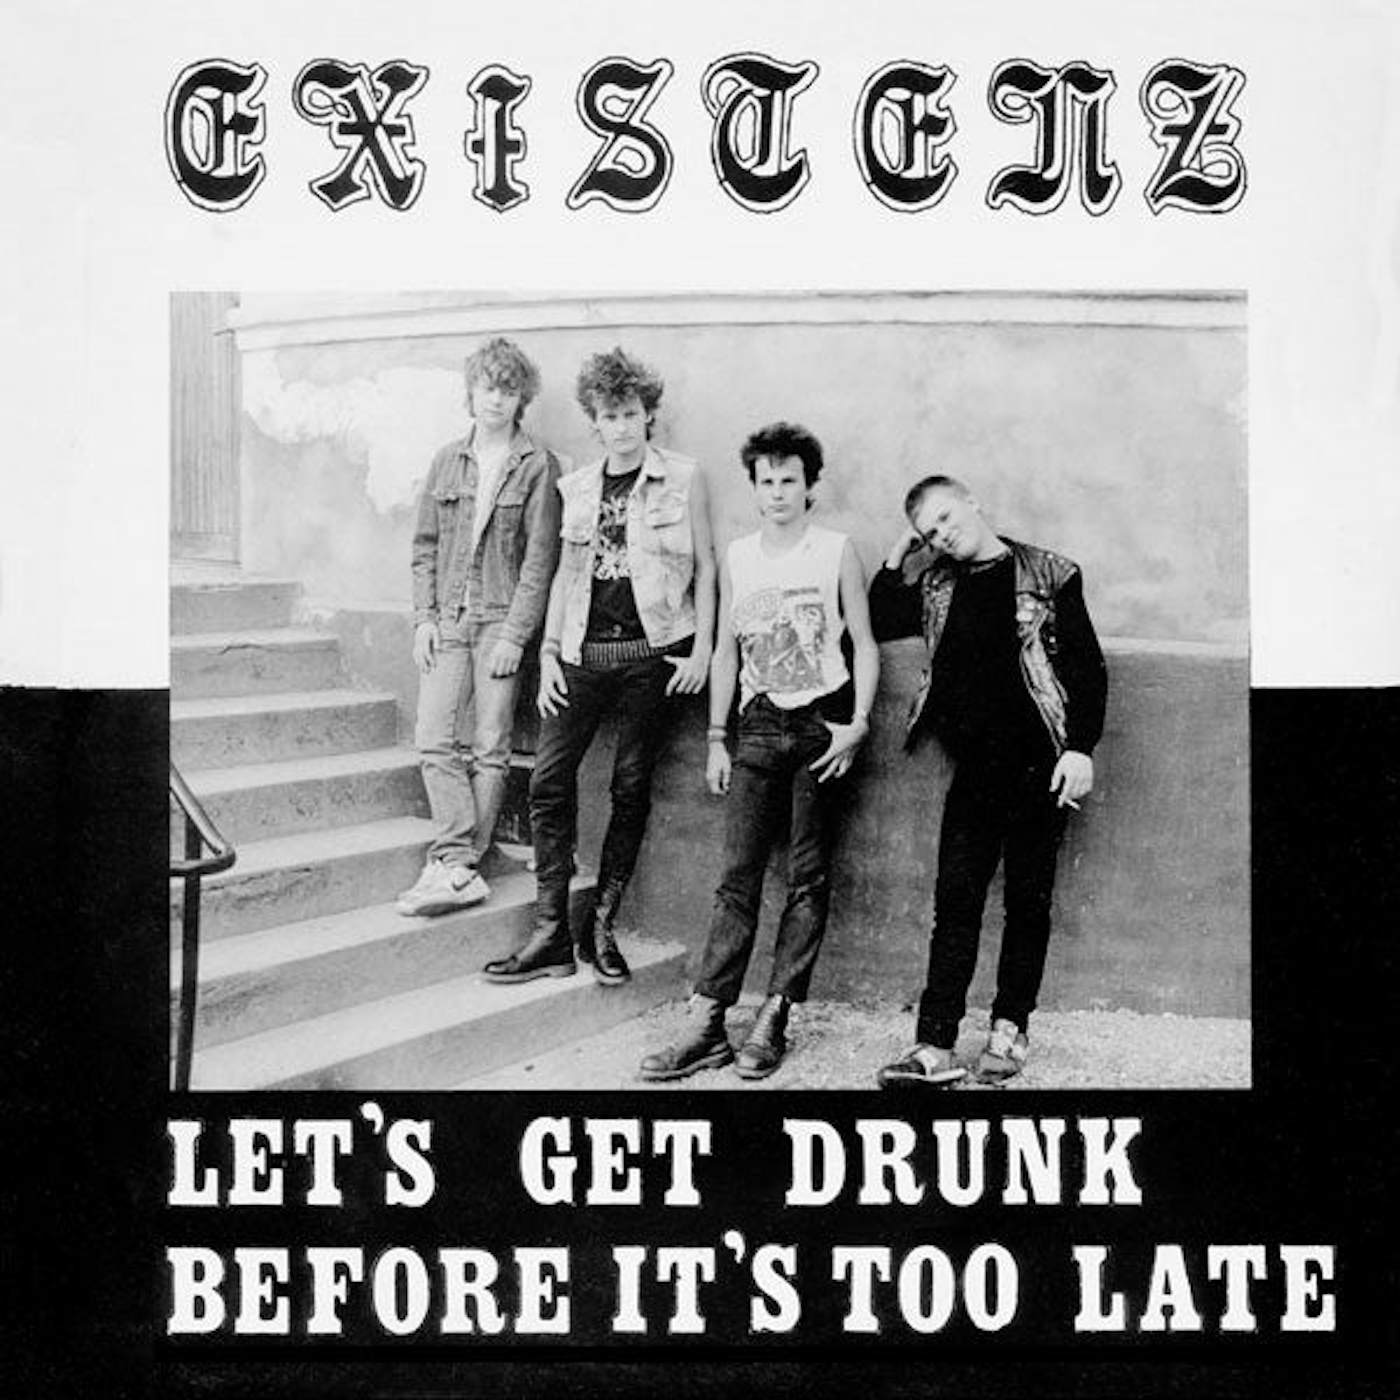  Existenz LP - Let’S Get Drunk Before It’S Too Late (Red Vinyl)